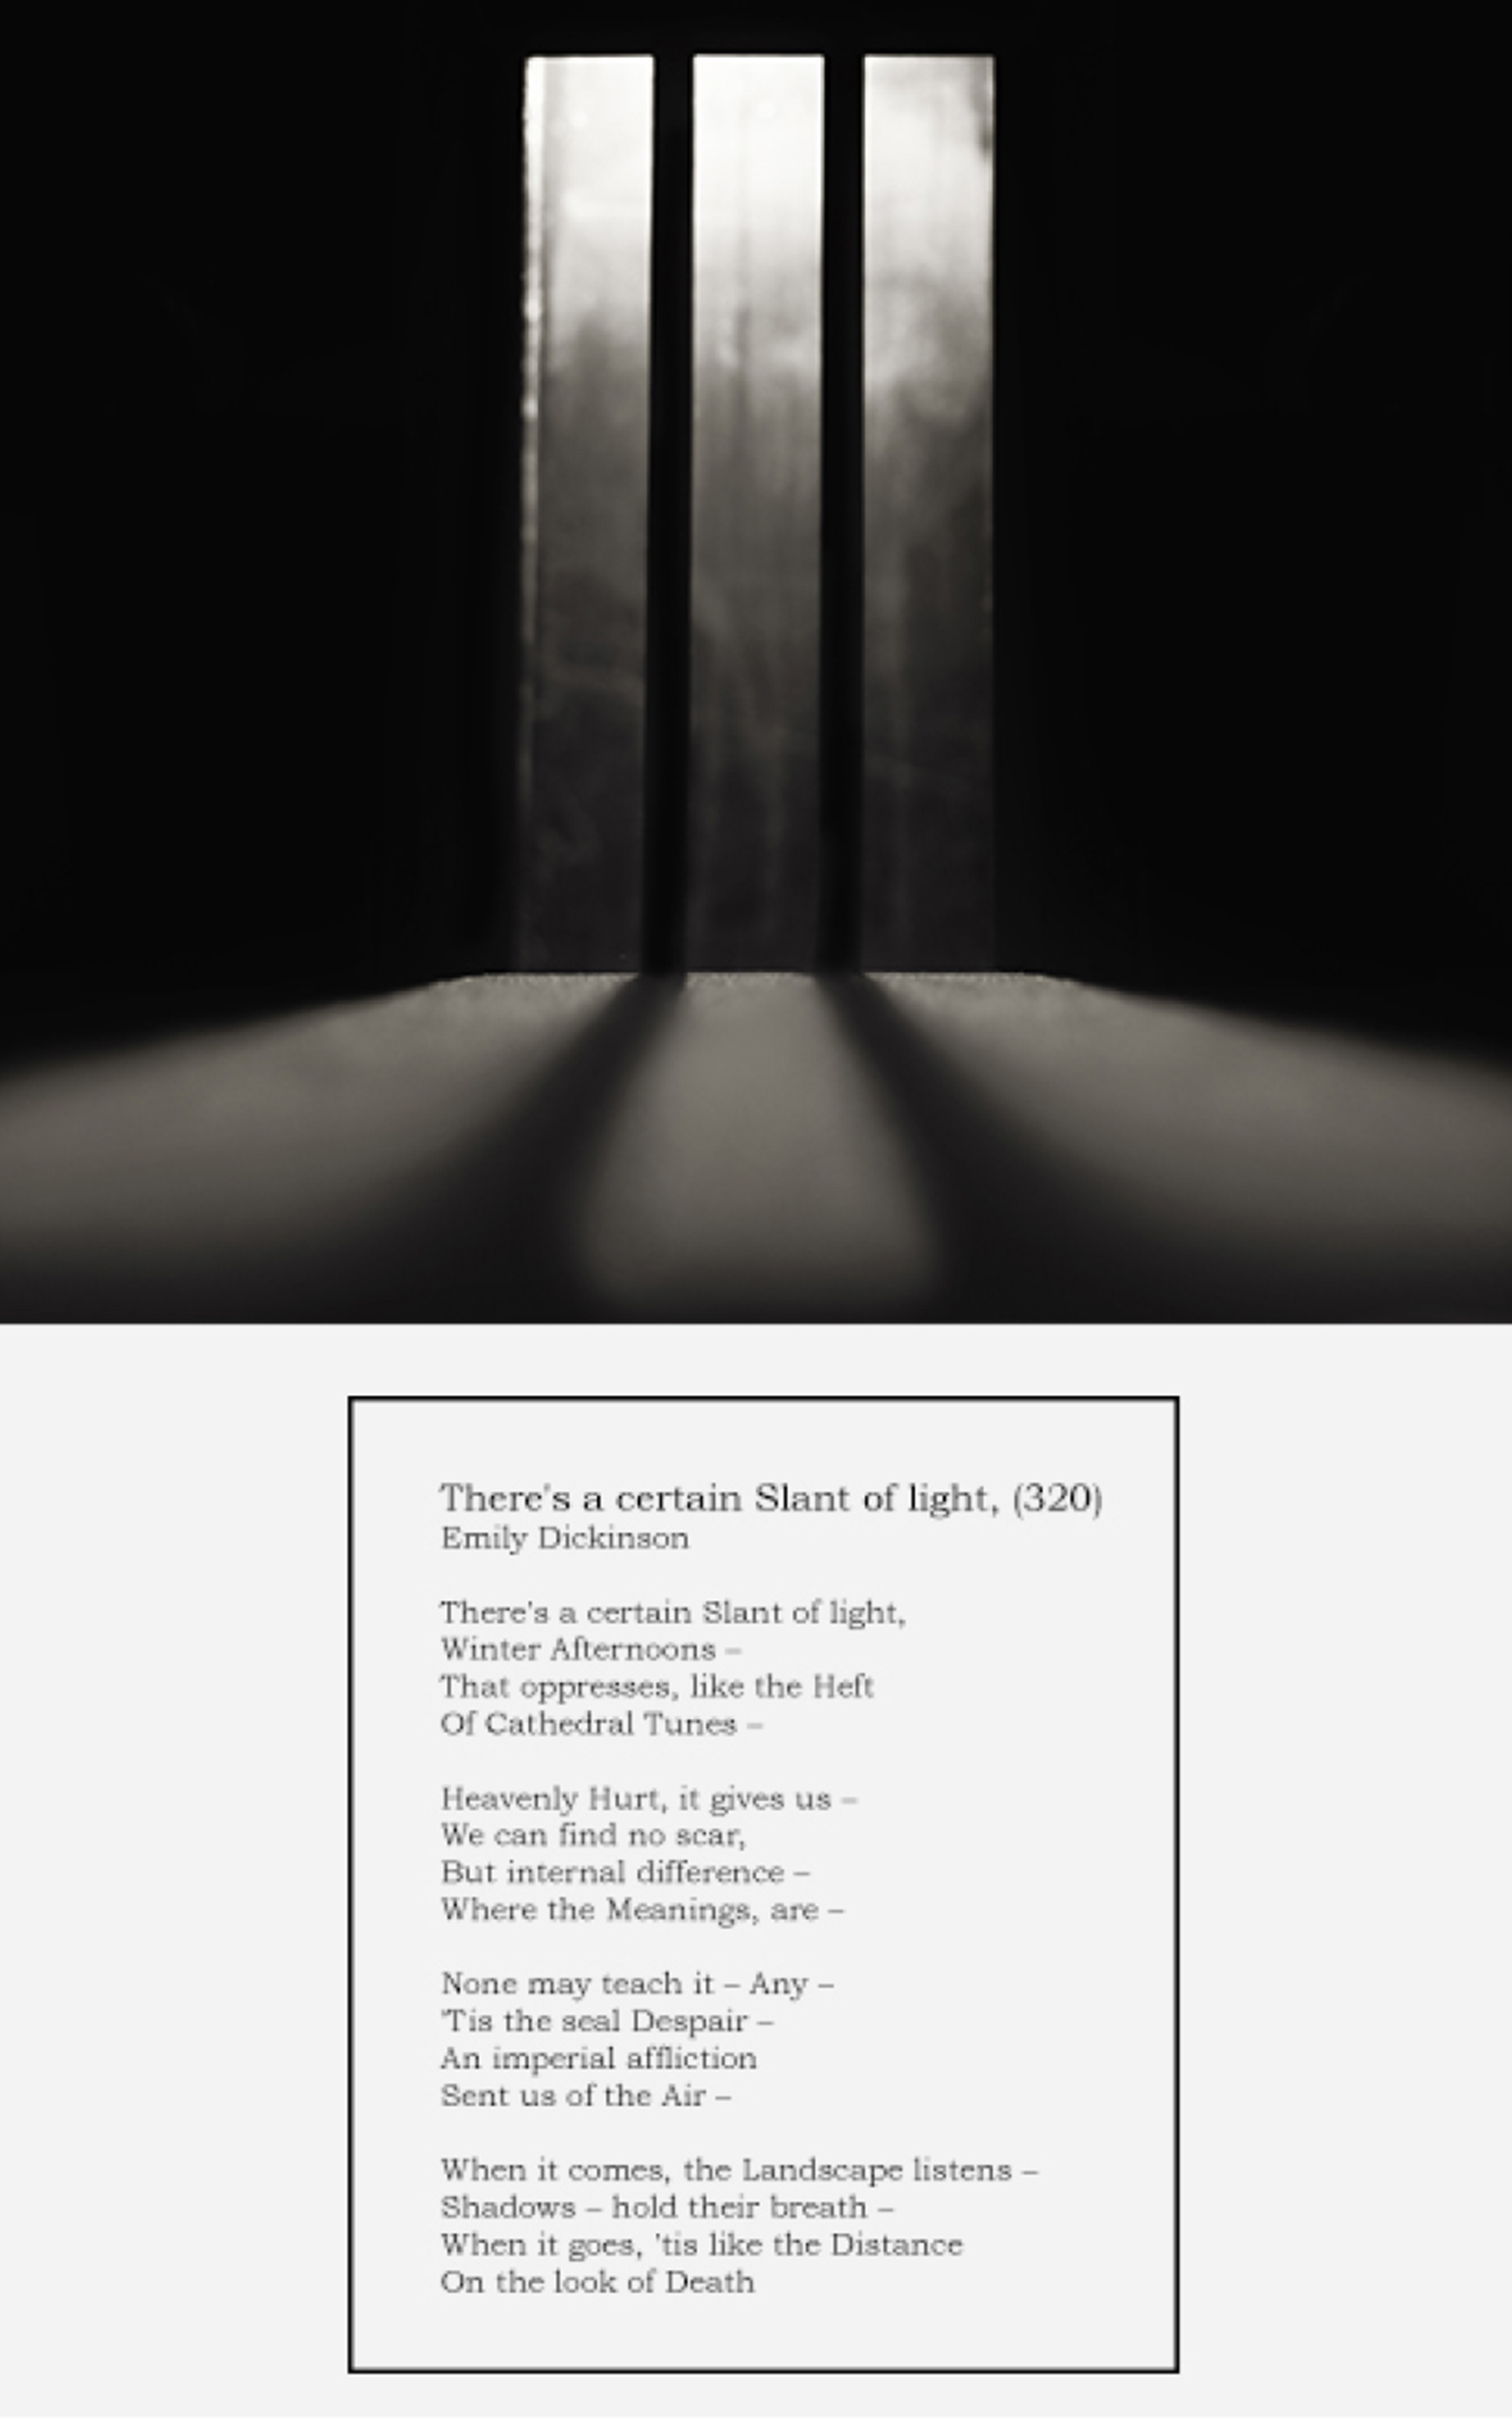 Photograph of a dark room with shafts of light coming through a frosted-glass door, placed above a written poem